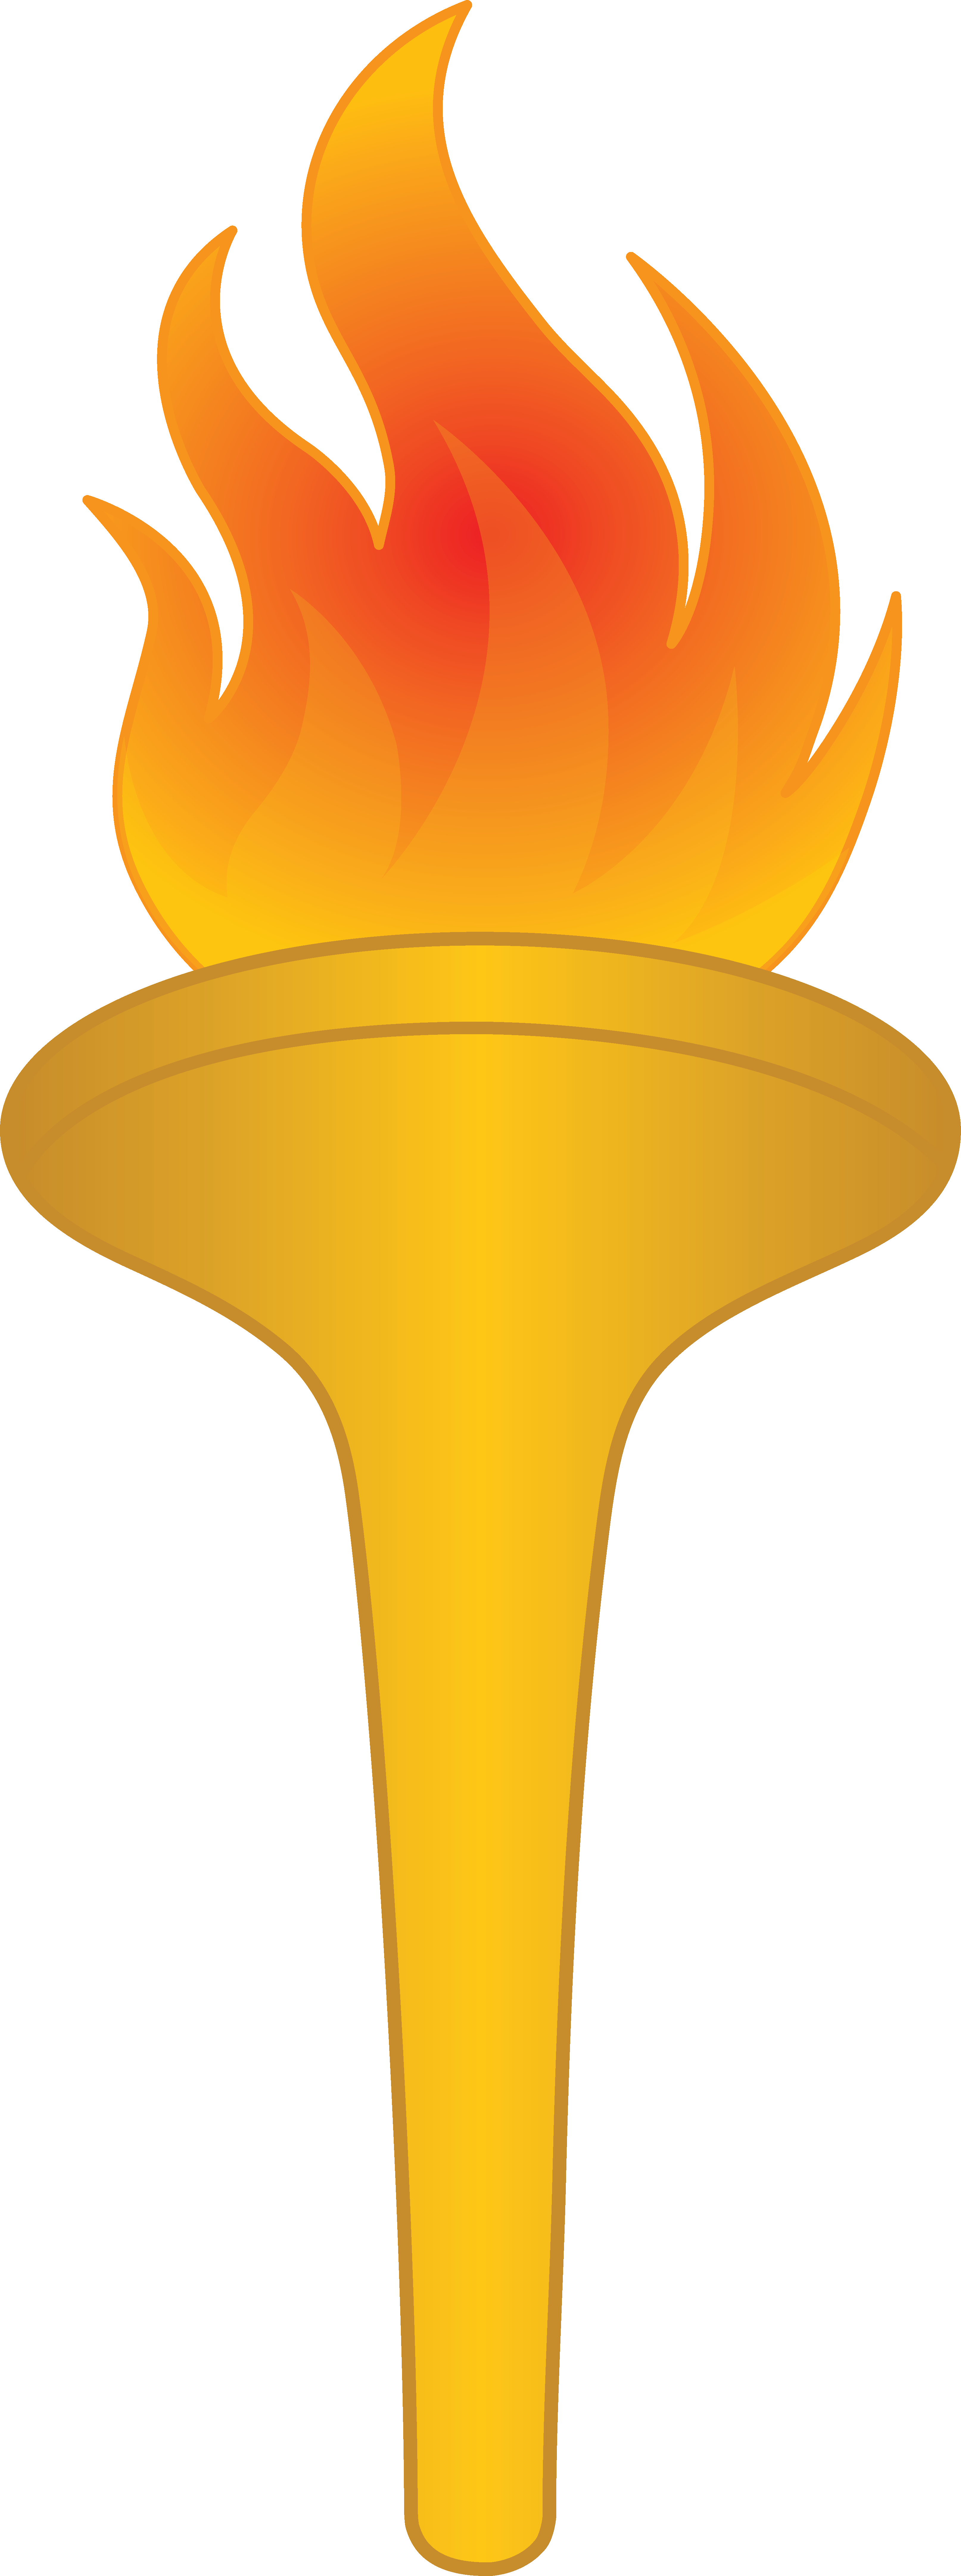 Free torch download.